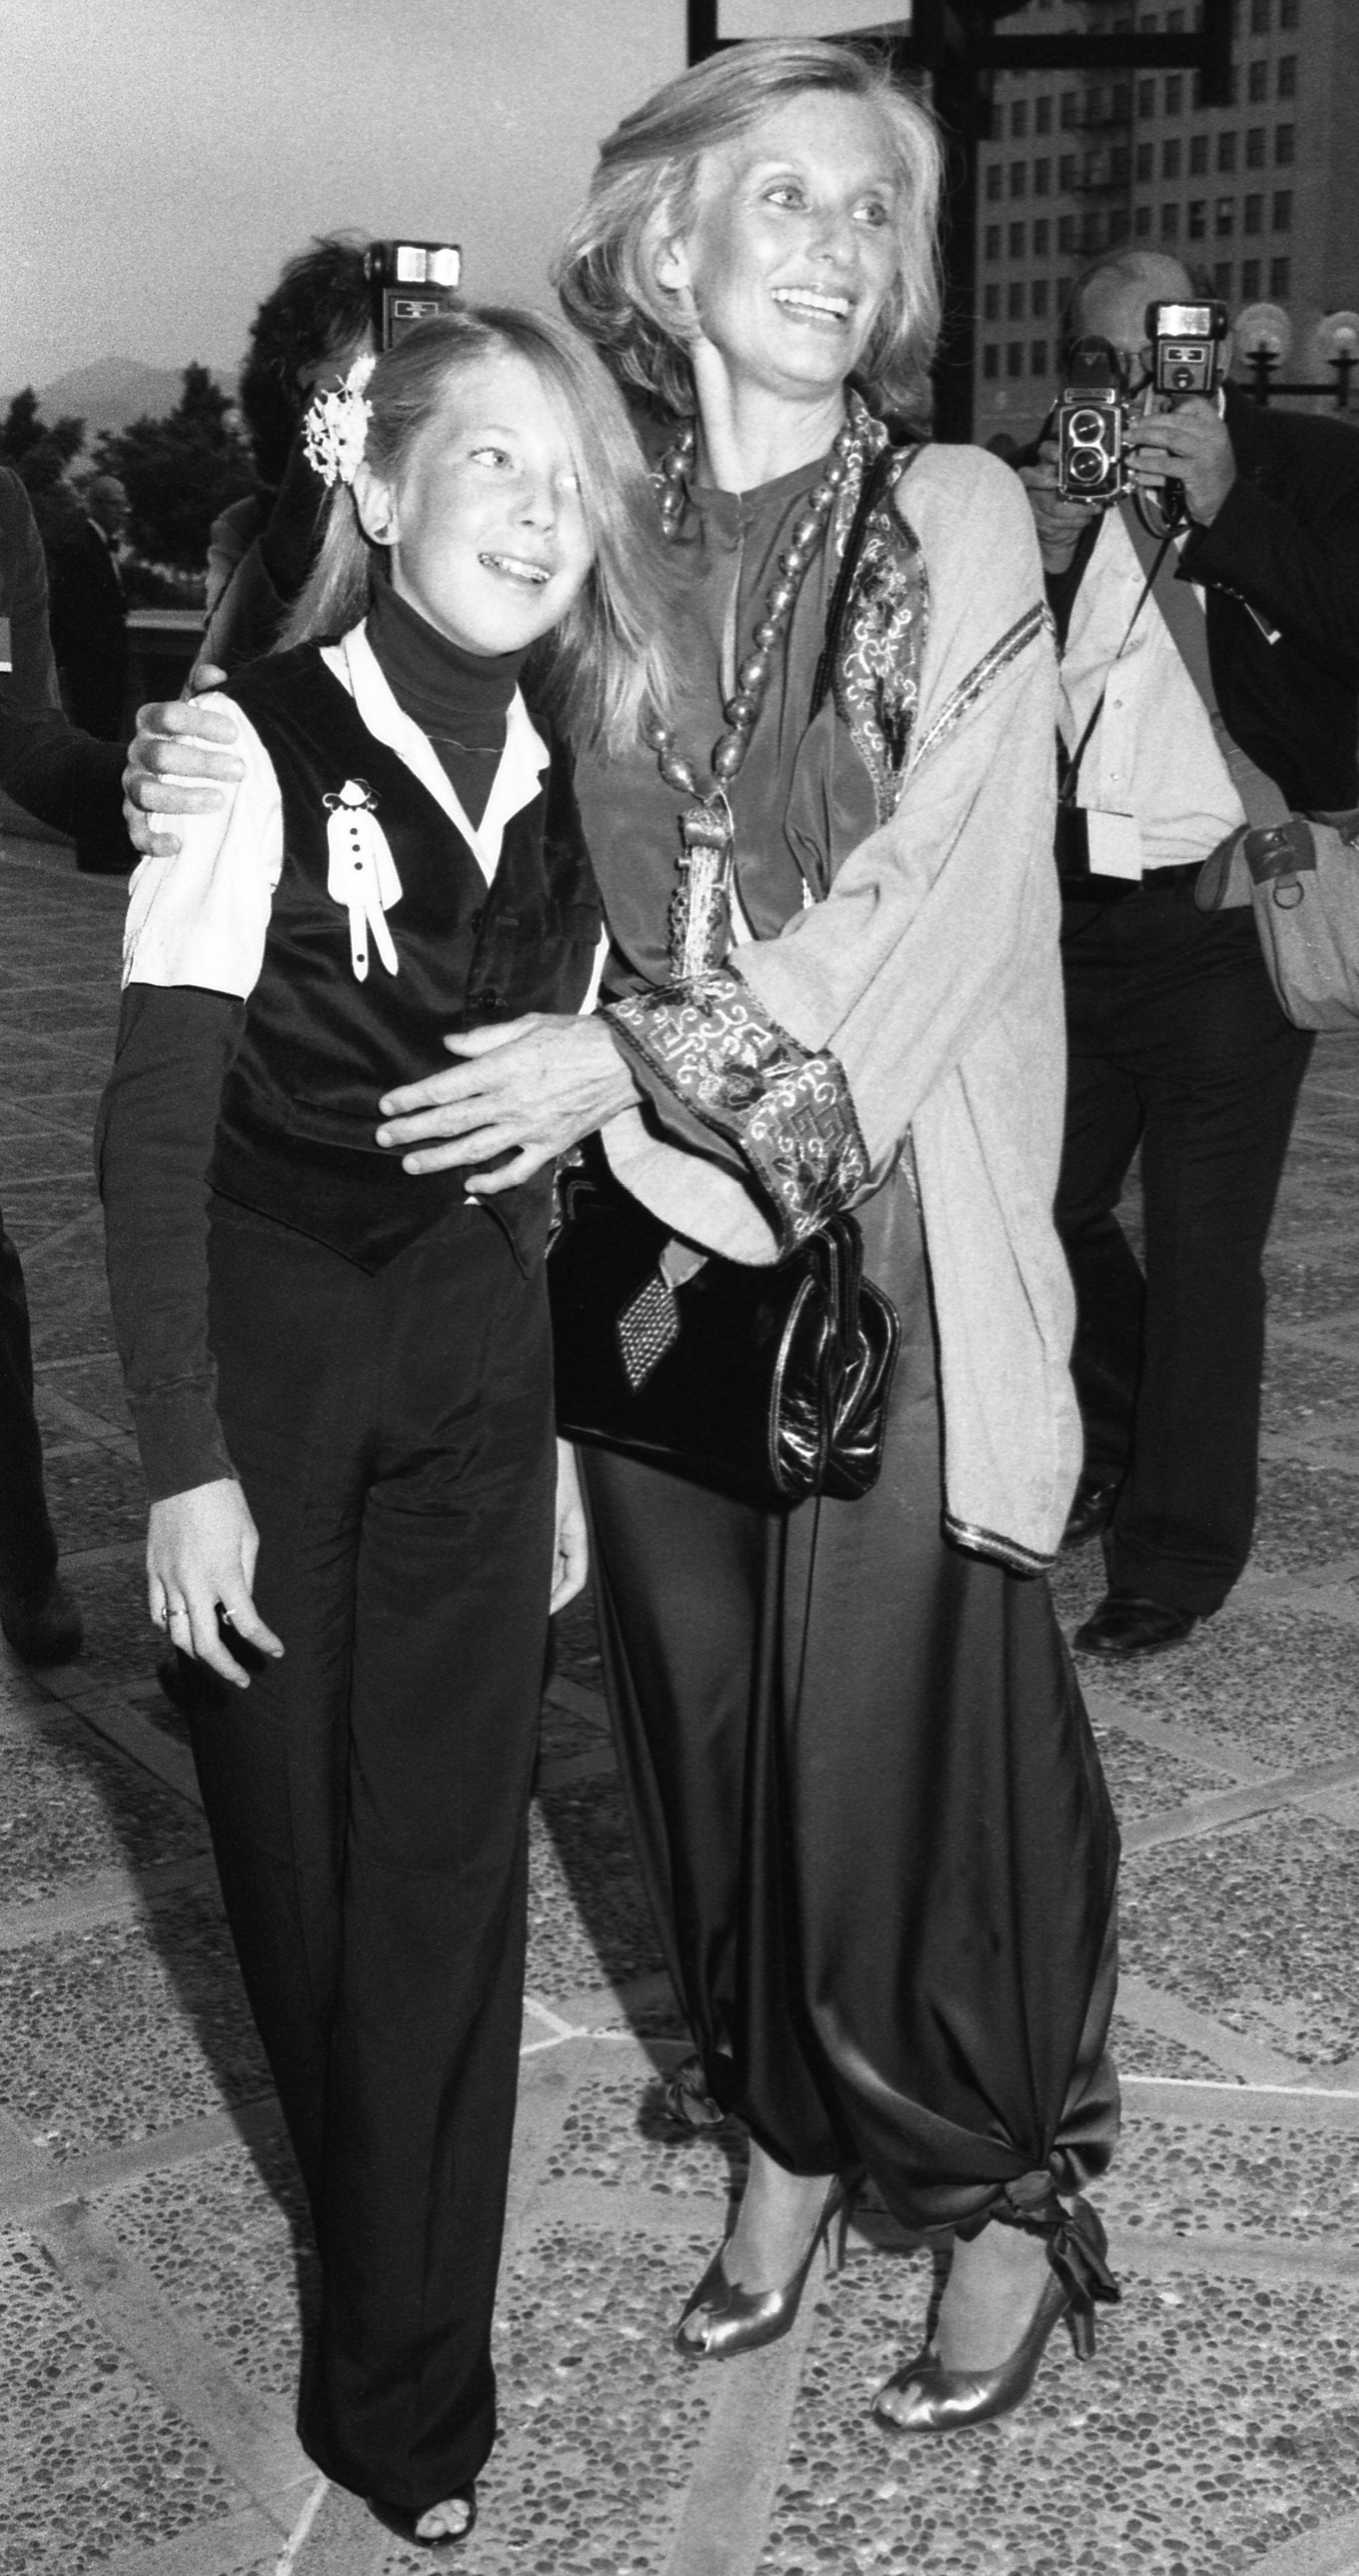 Actress Cloris Leachman and her daughter Dinah attend the 30th Annual Emmy Awards on September 17, 1978 at the Pasadena Civic Auditorium in Pasadena, California. | Source: Getty Images